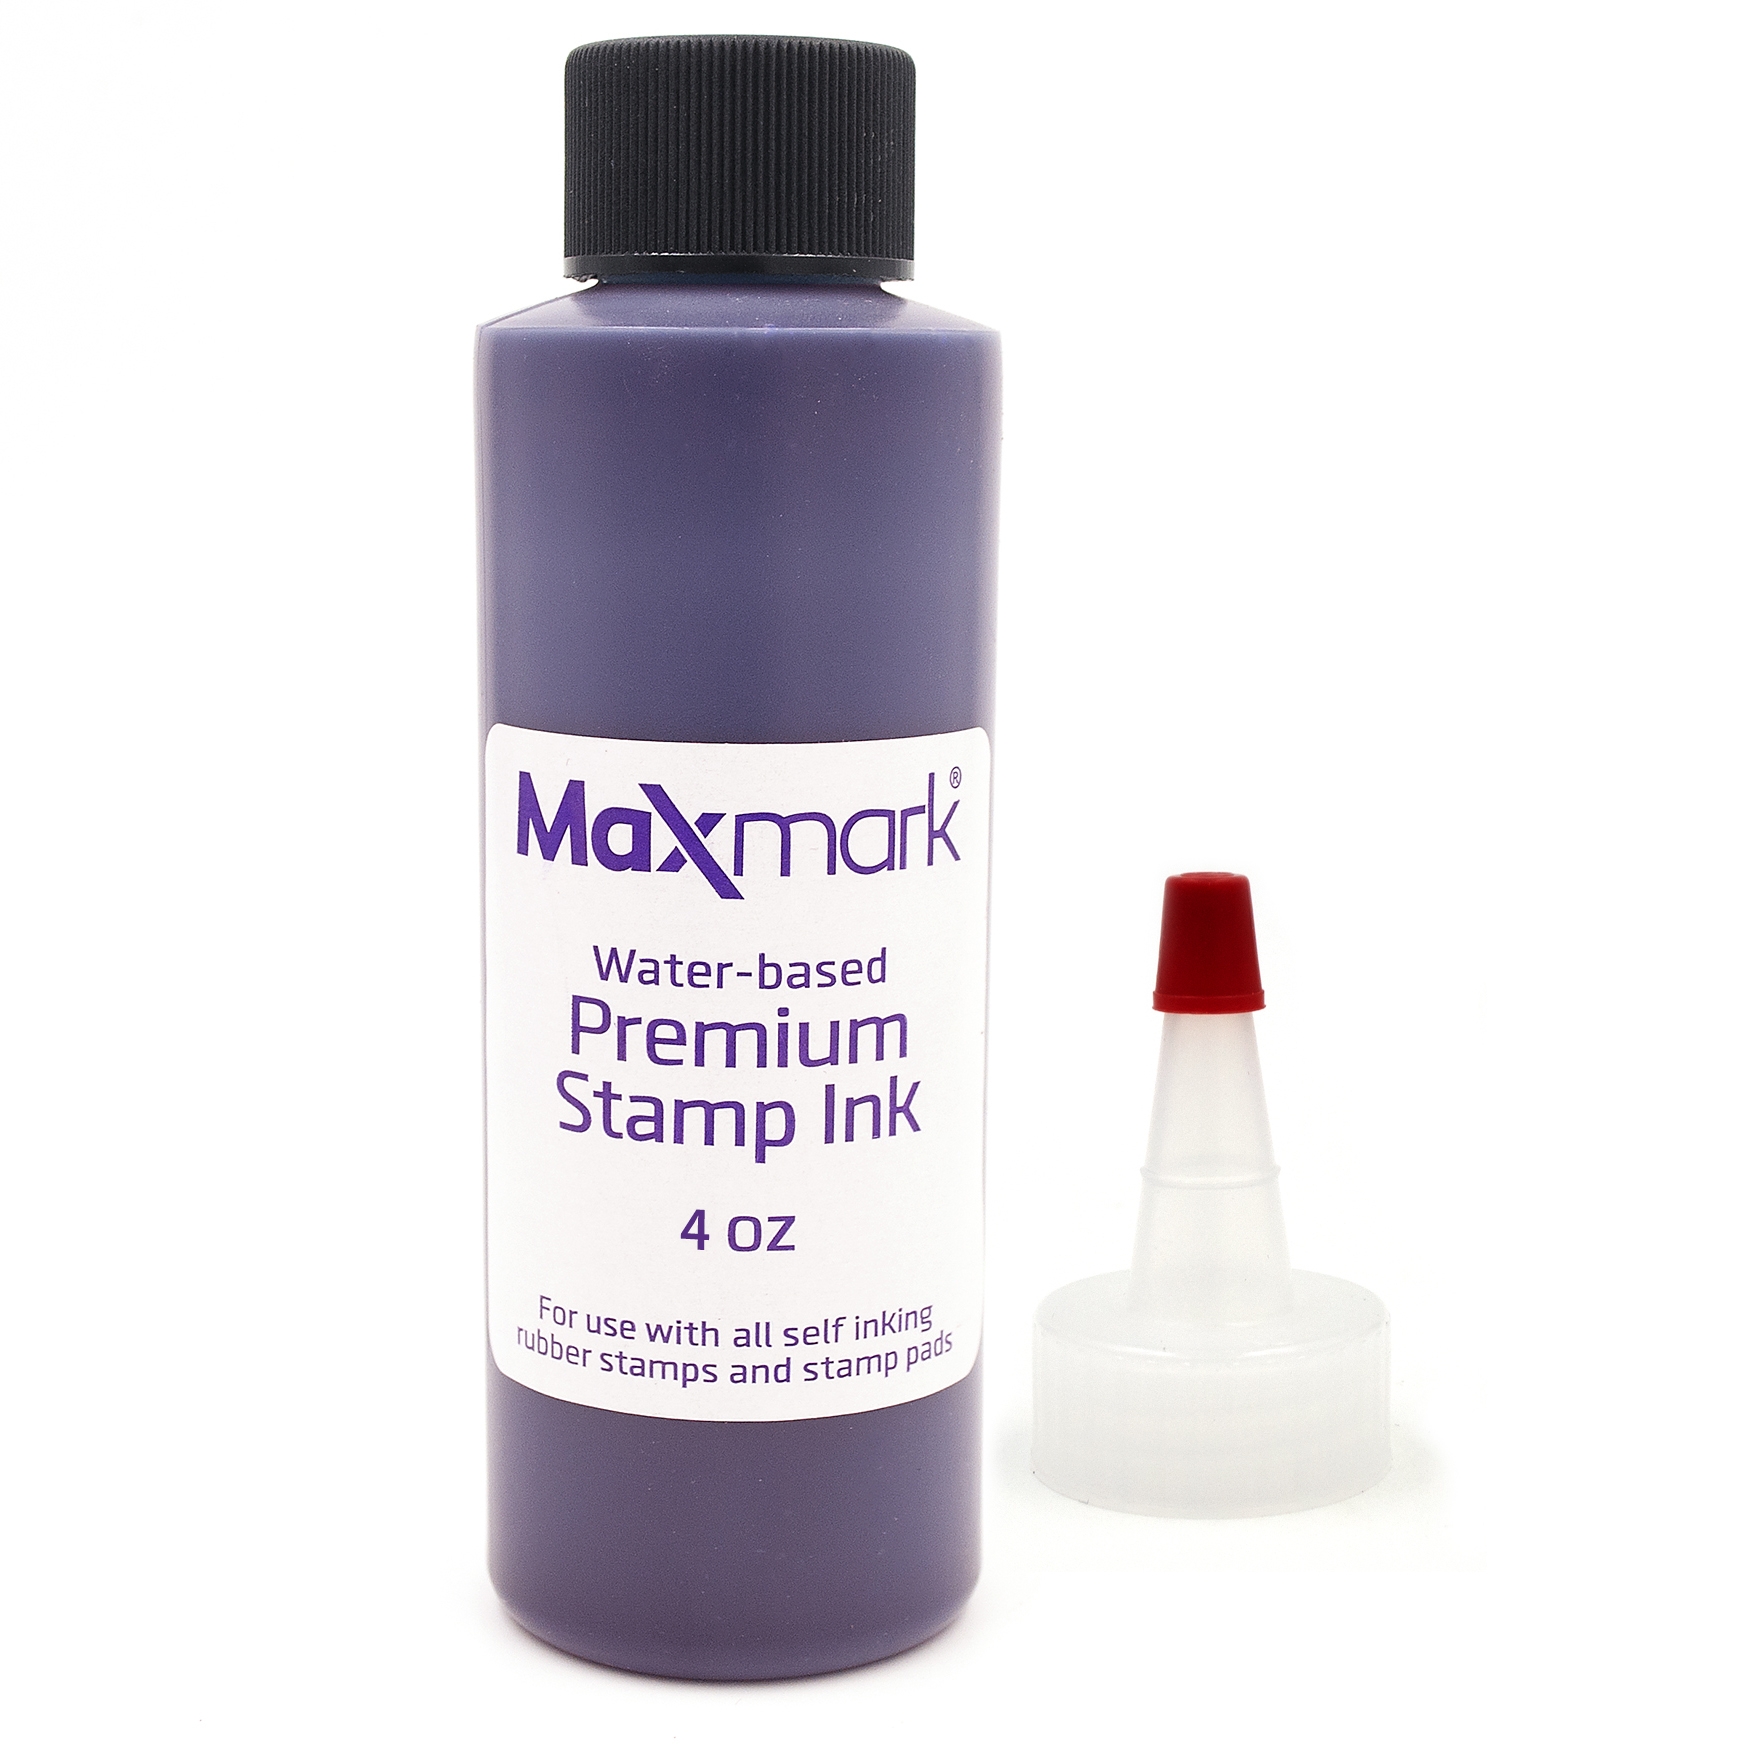 Premium Refill Ink for self Inking Stamps and Stamp Pads, Purple Color - 4 oz.